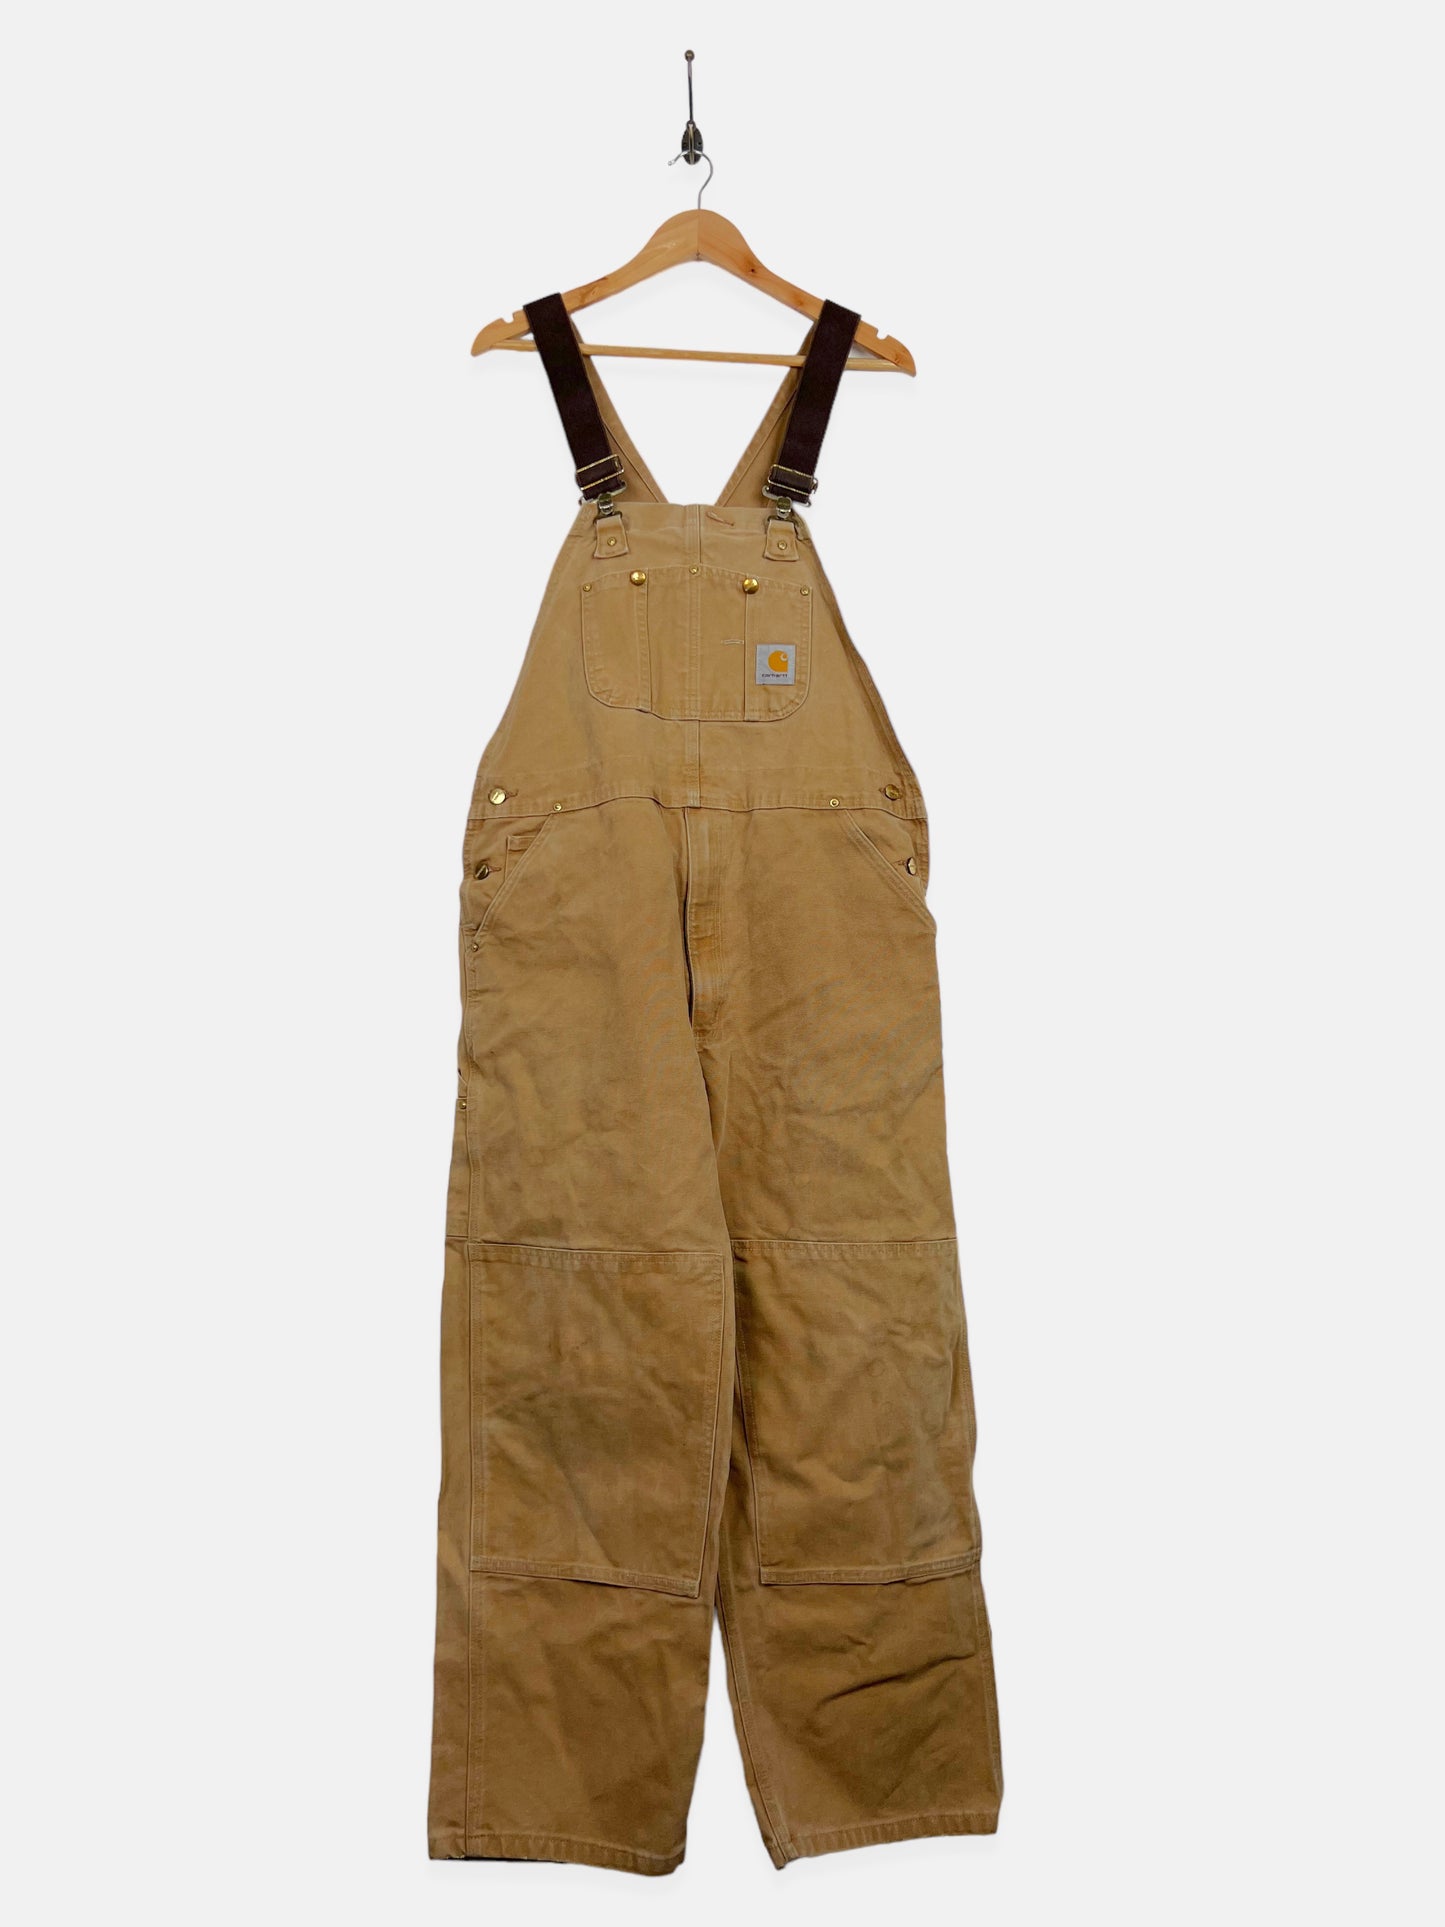 90's Carhartt Heavy Duty Vintage Dungarees/Overalls up to Size 40"